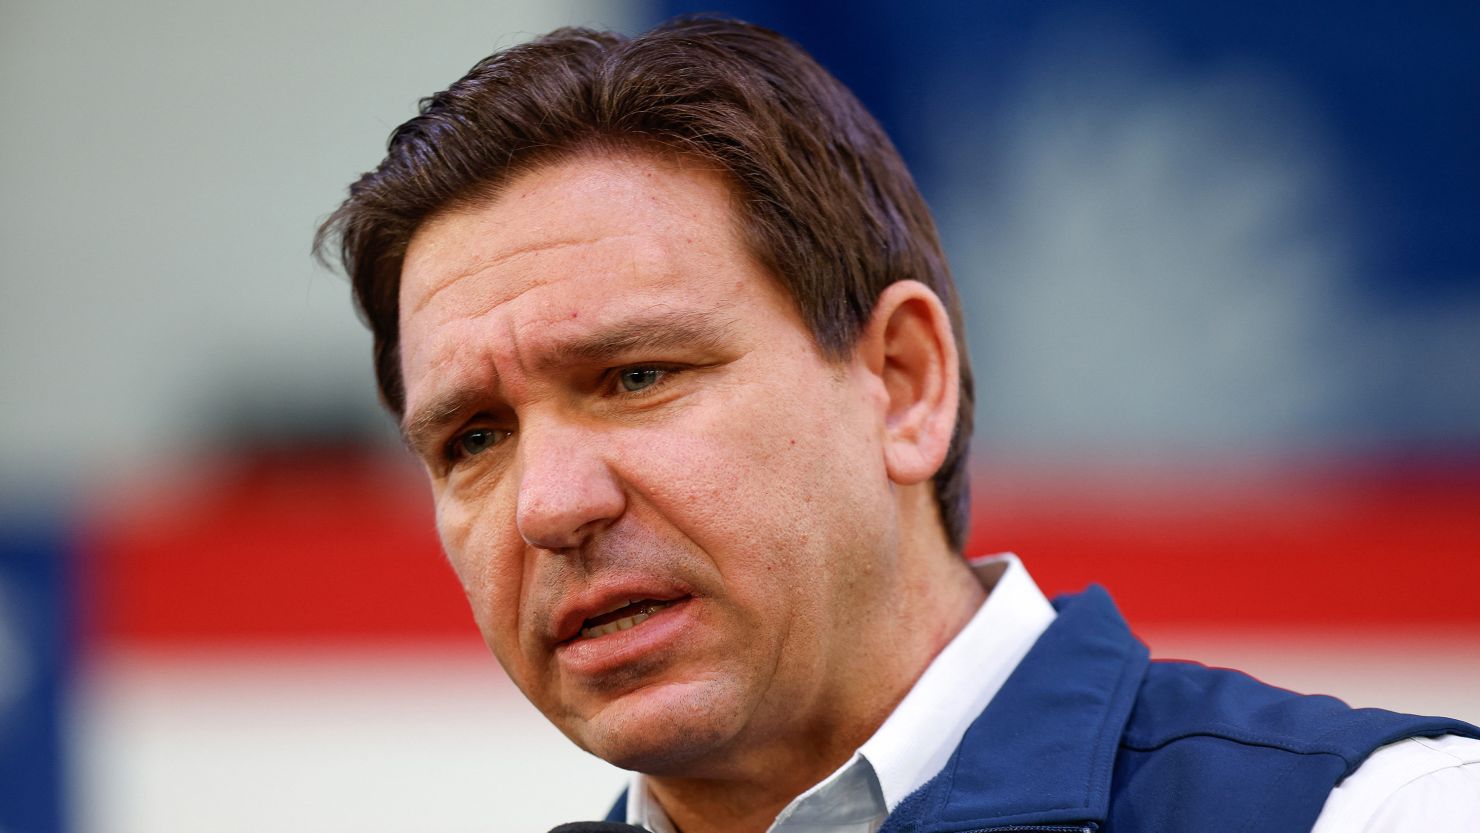 Florida Gov. Ron DeSantis speaks during a campaign visit ahead of the South Carolina presidential primary in Myrtle Beach, South Carolina, on January 20, 2024.